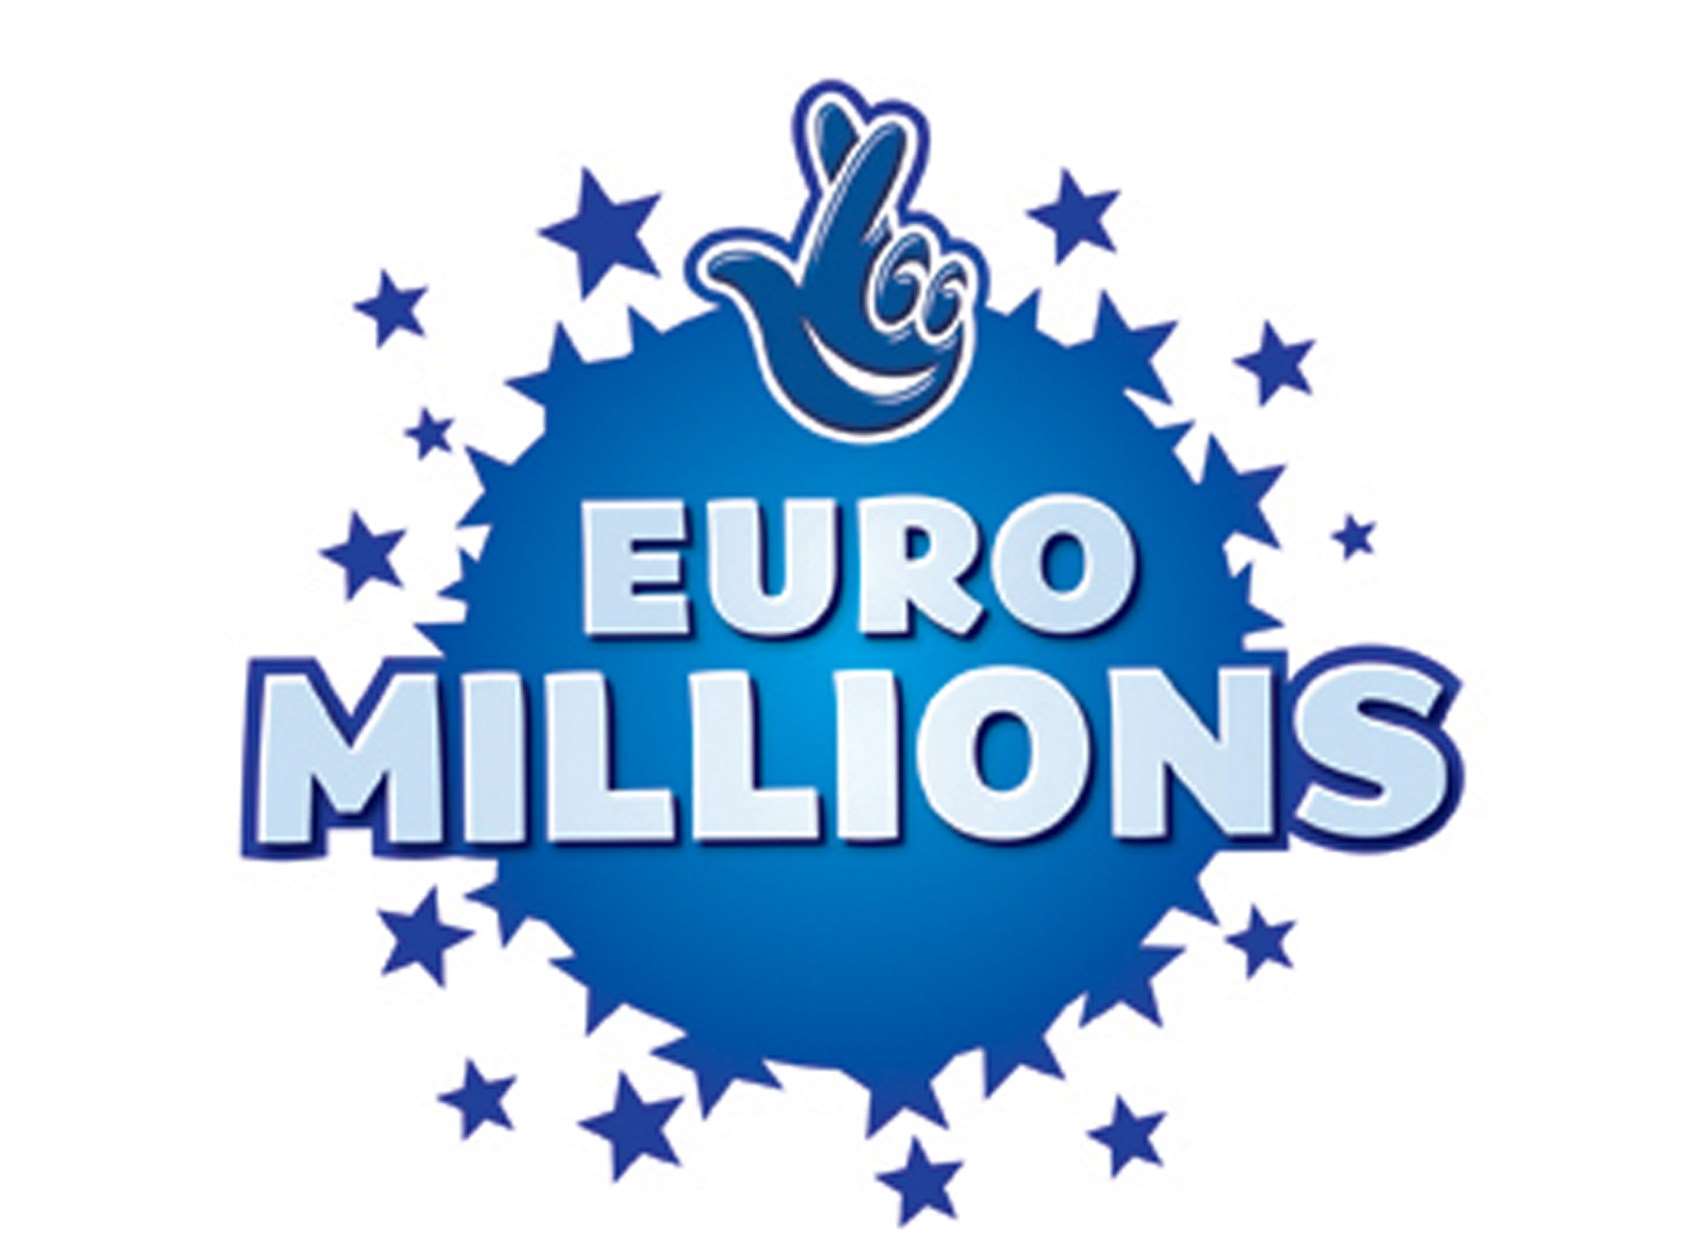 The winning EuroMillions ticket was bought in Ashford